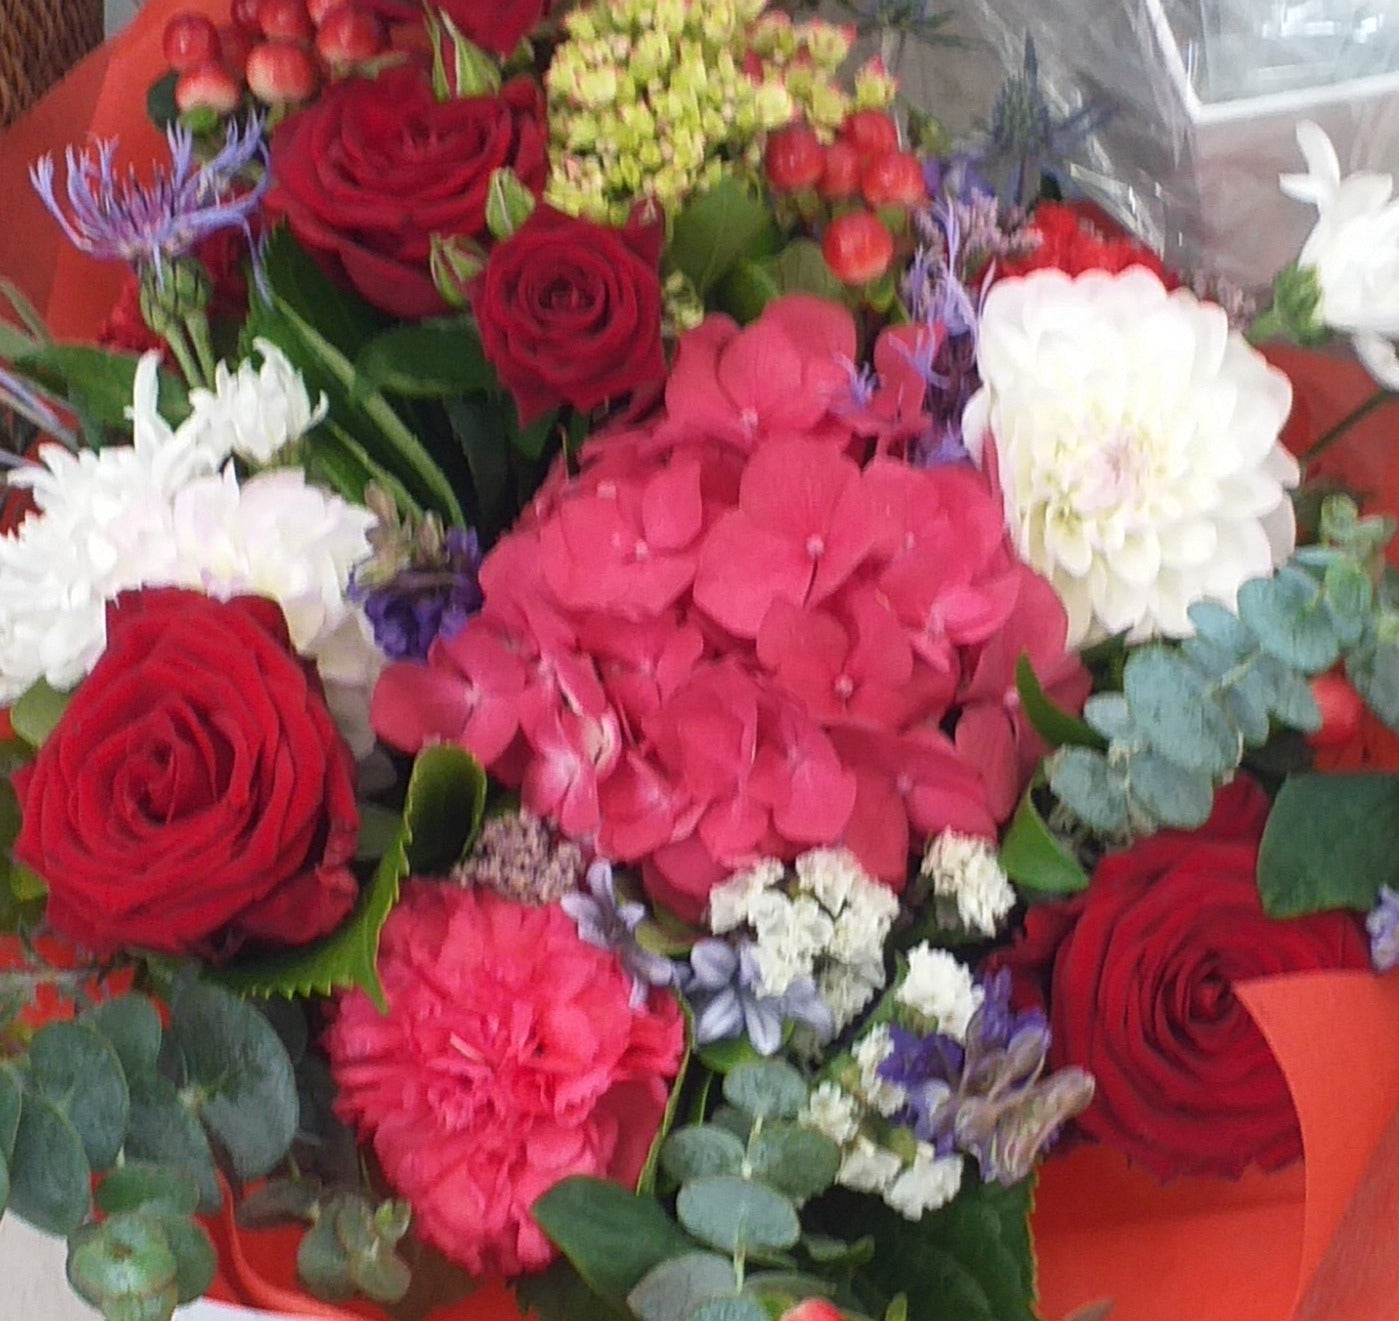 Flower bouquet in colours of red and white, carnation, roses, hydrangea (when in season) berries and gum